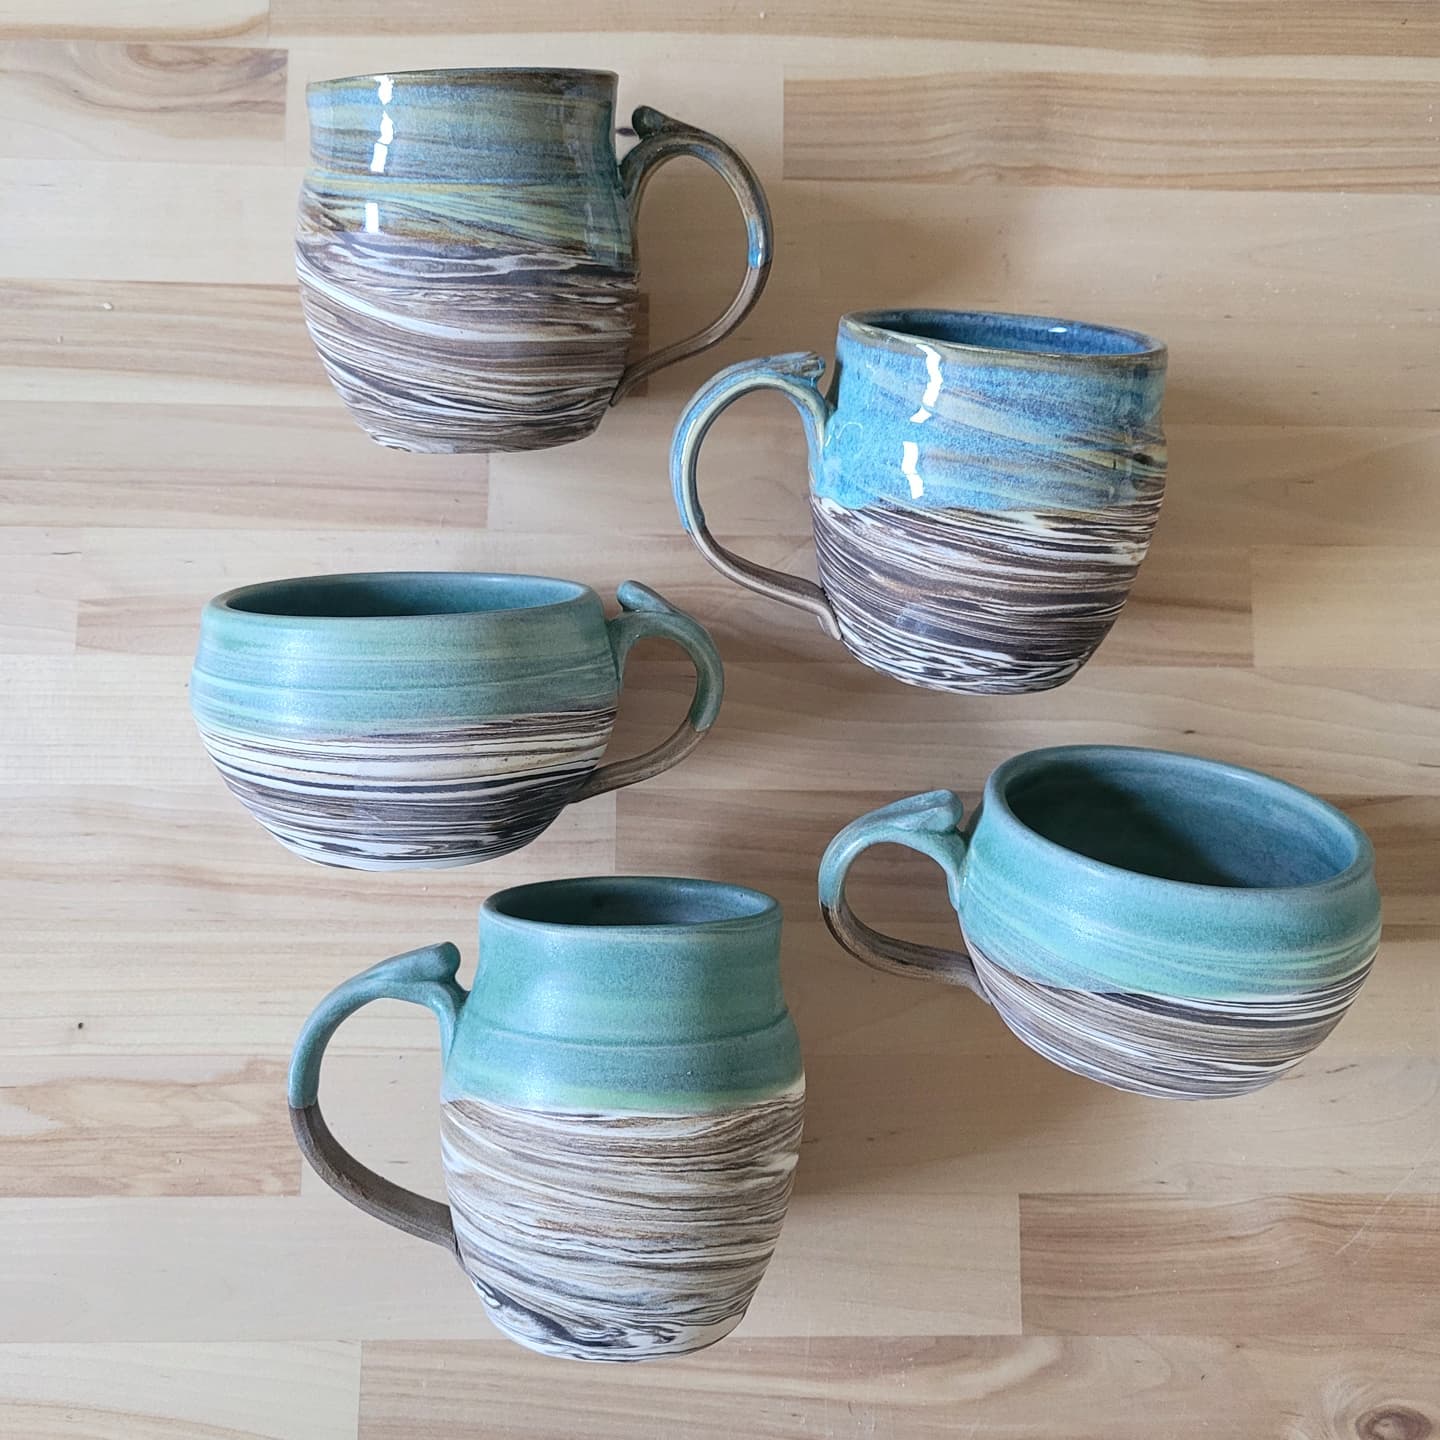 Mugs made and painted by Hedgerow Pottery in Monticello.